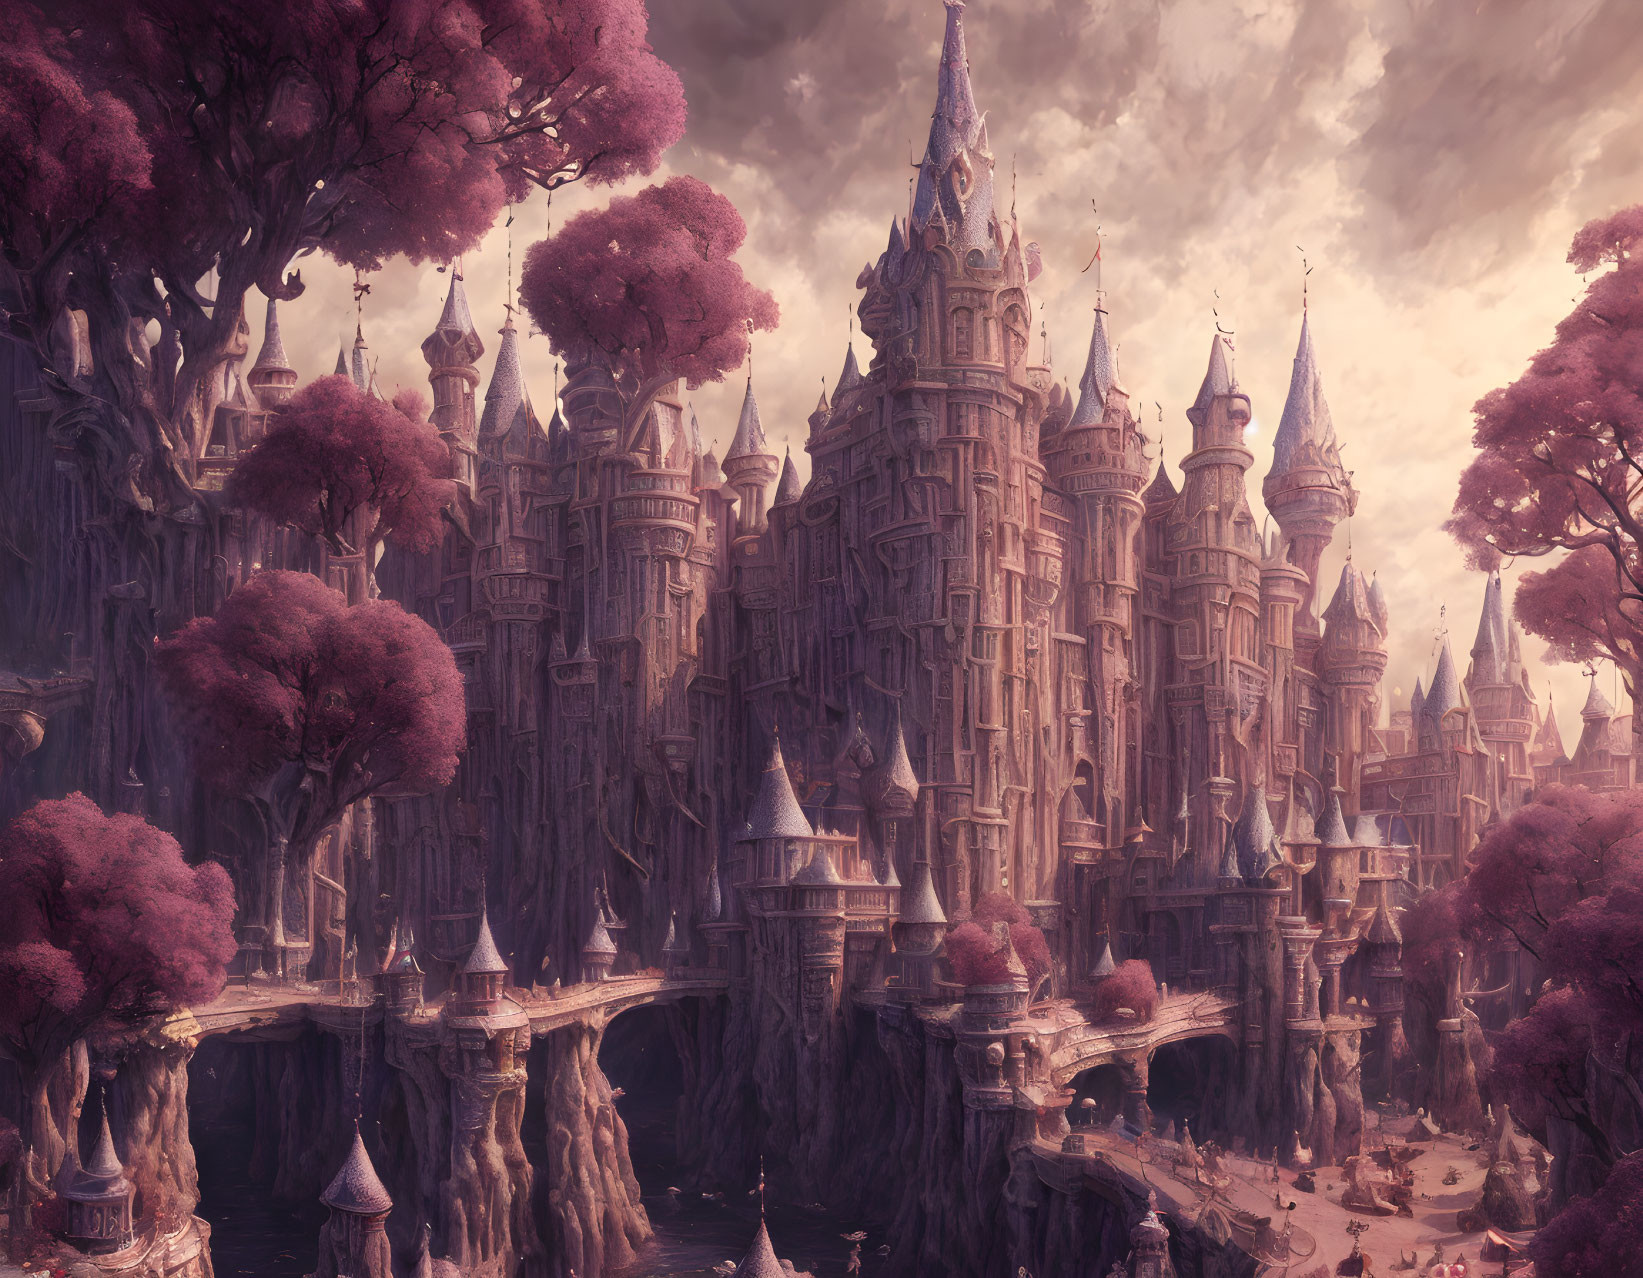 Ethereal fantasy castle in lush pink forest under pink-tinted sky